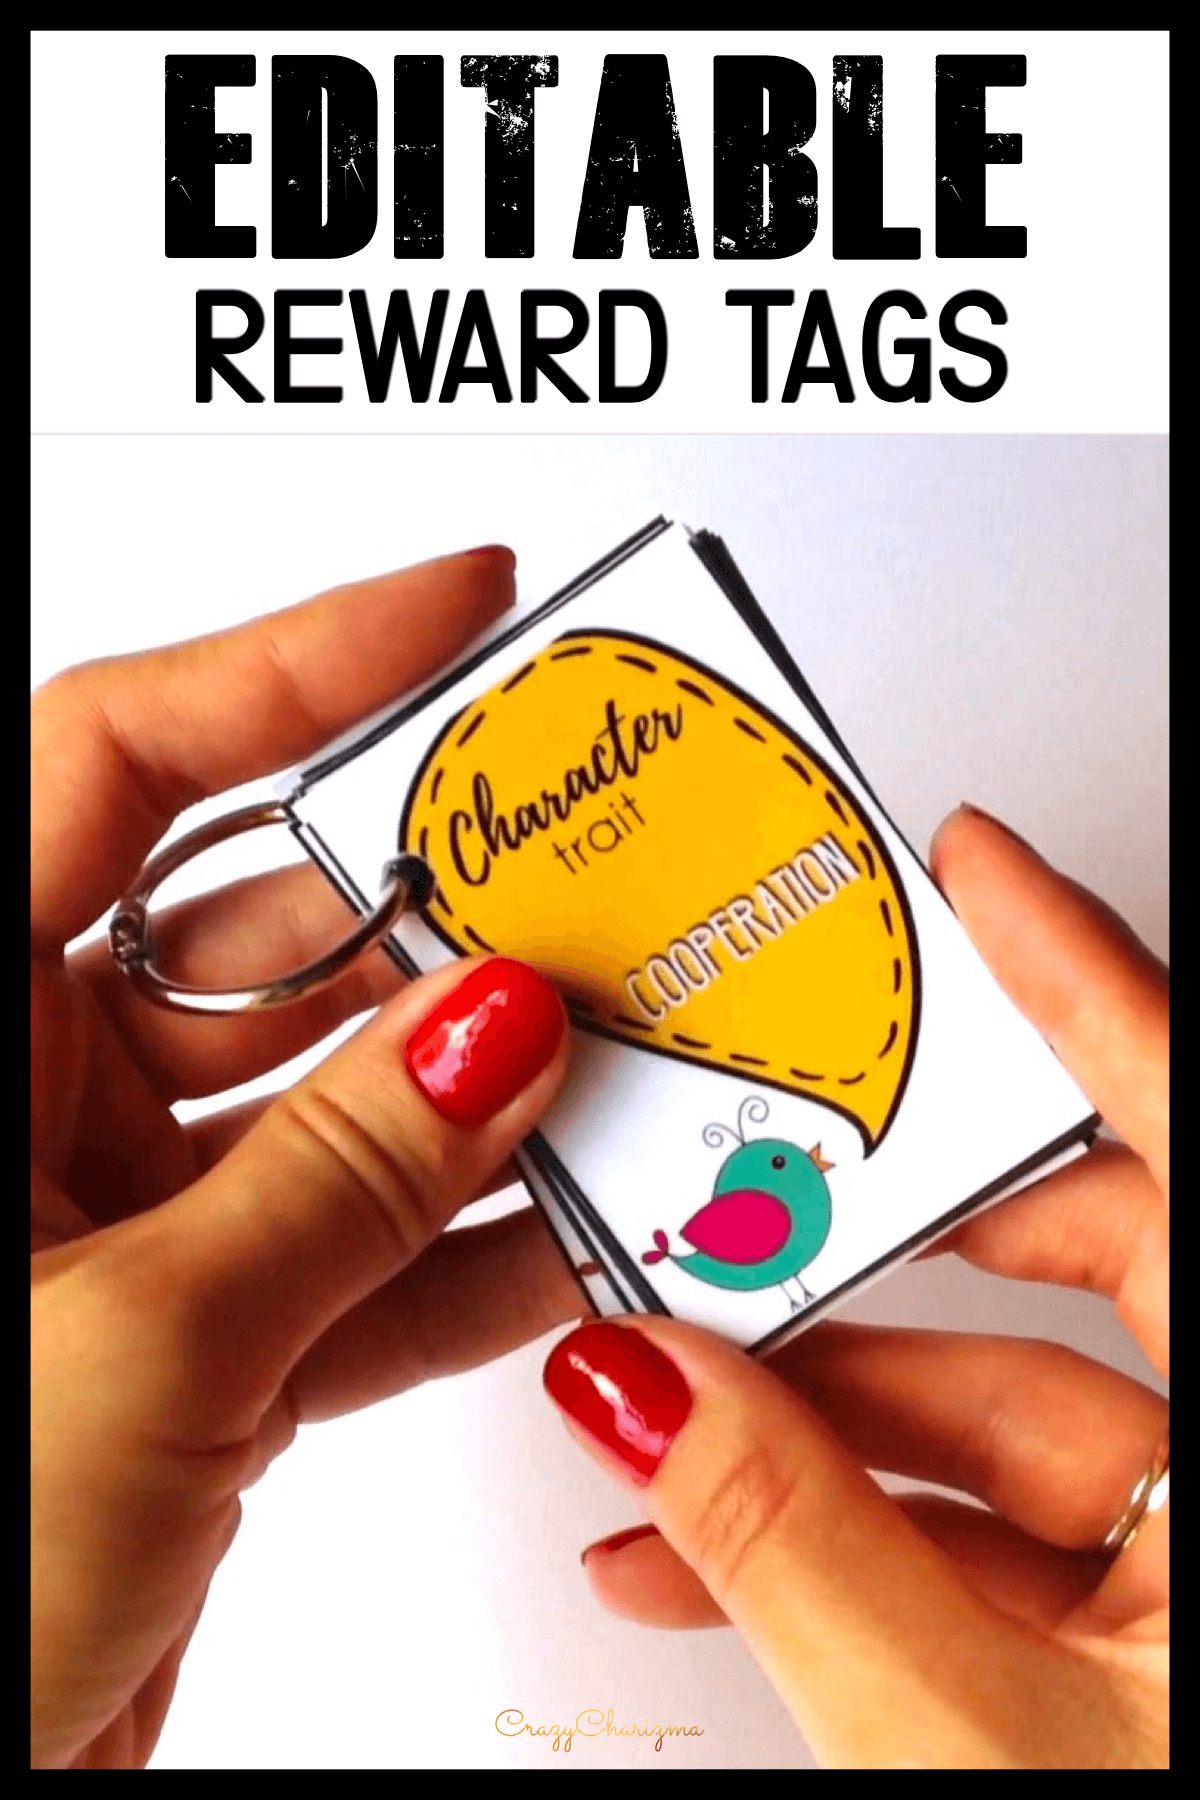 Promote and reward positive behavior with these reward tags. Available for you: ready to print reward tags (character traits) and EDITABLE version (just fill out with the text you want)!